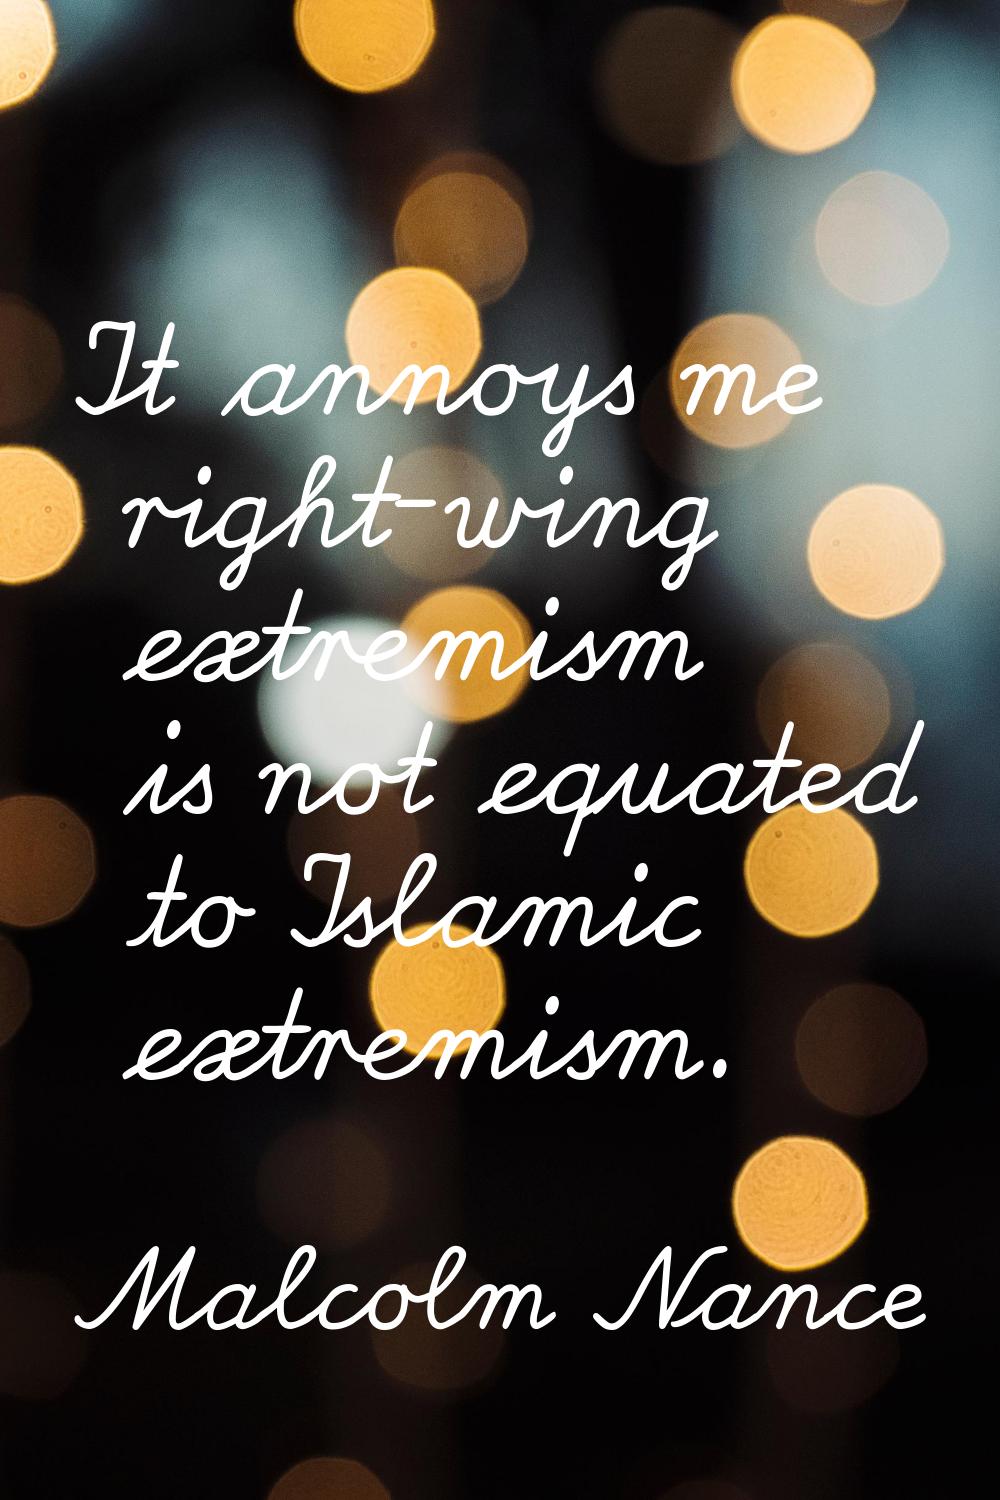 It annoys me right-wing extremism is not equated to Islamic extremism.